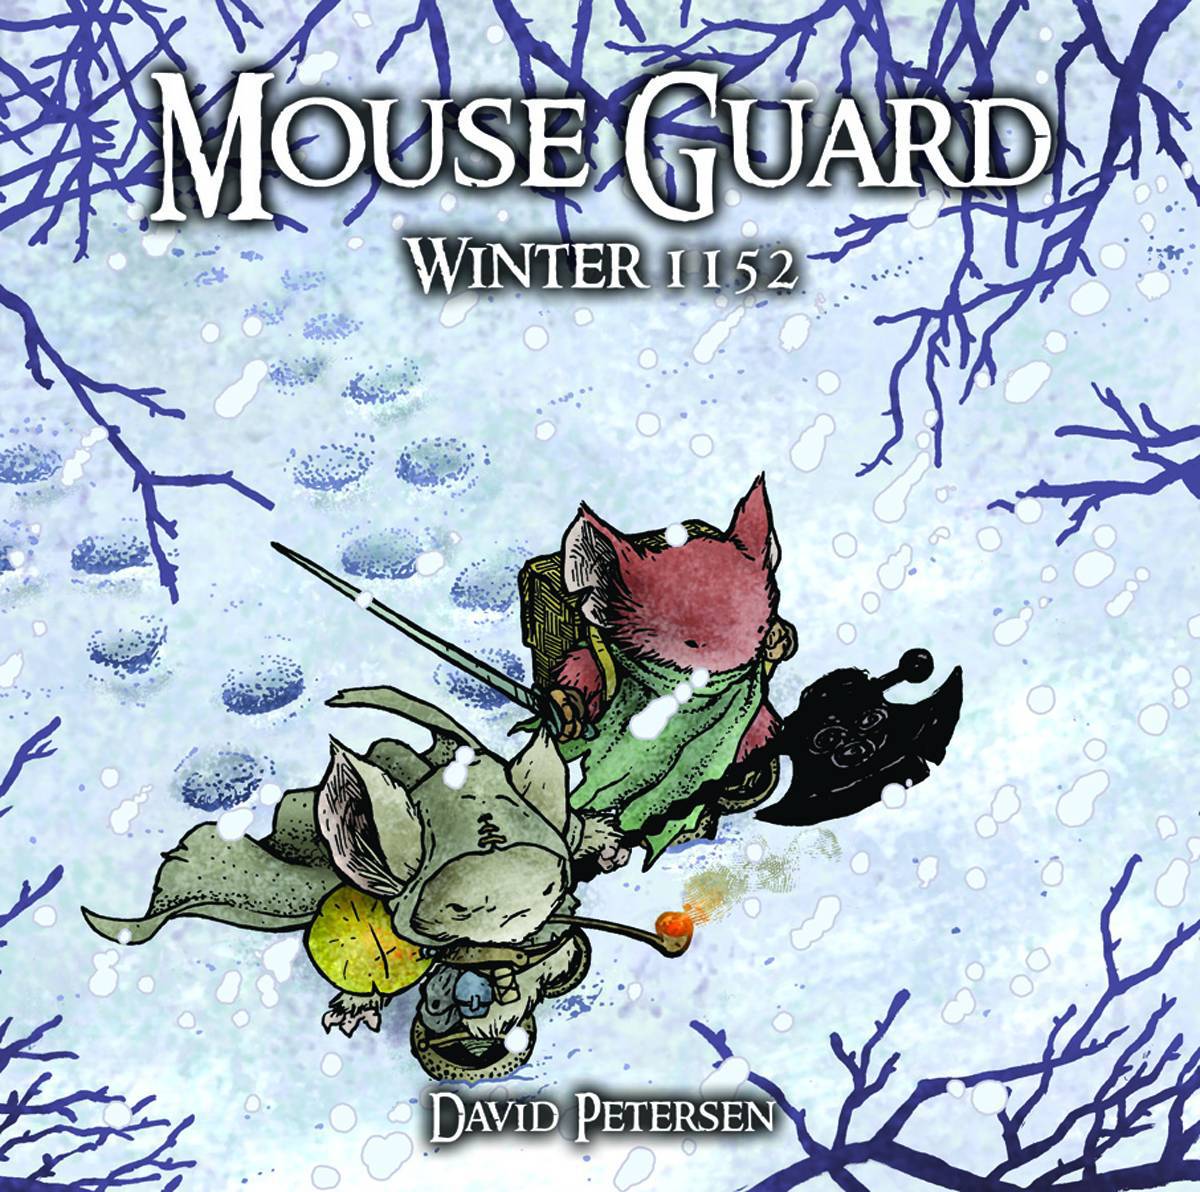 Mouse Guard Vol. 02 Winter 1152 Dust Jacket Edition